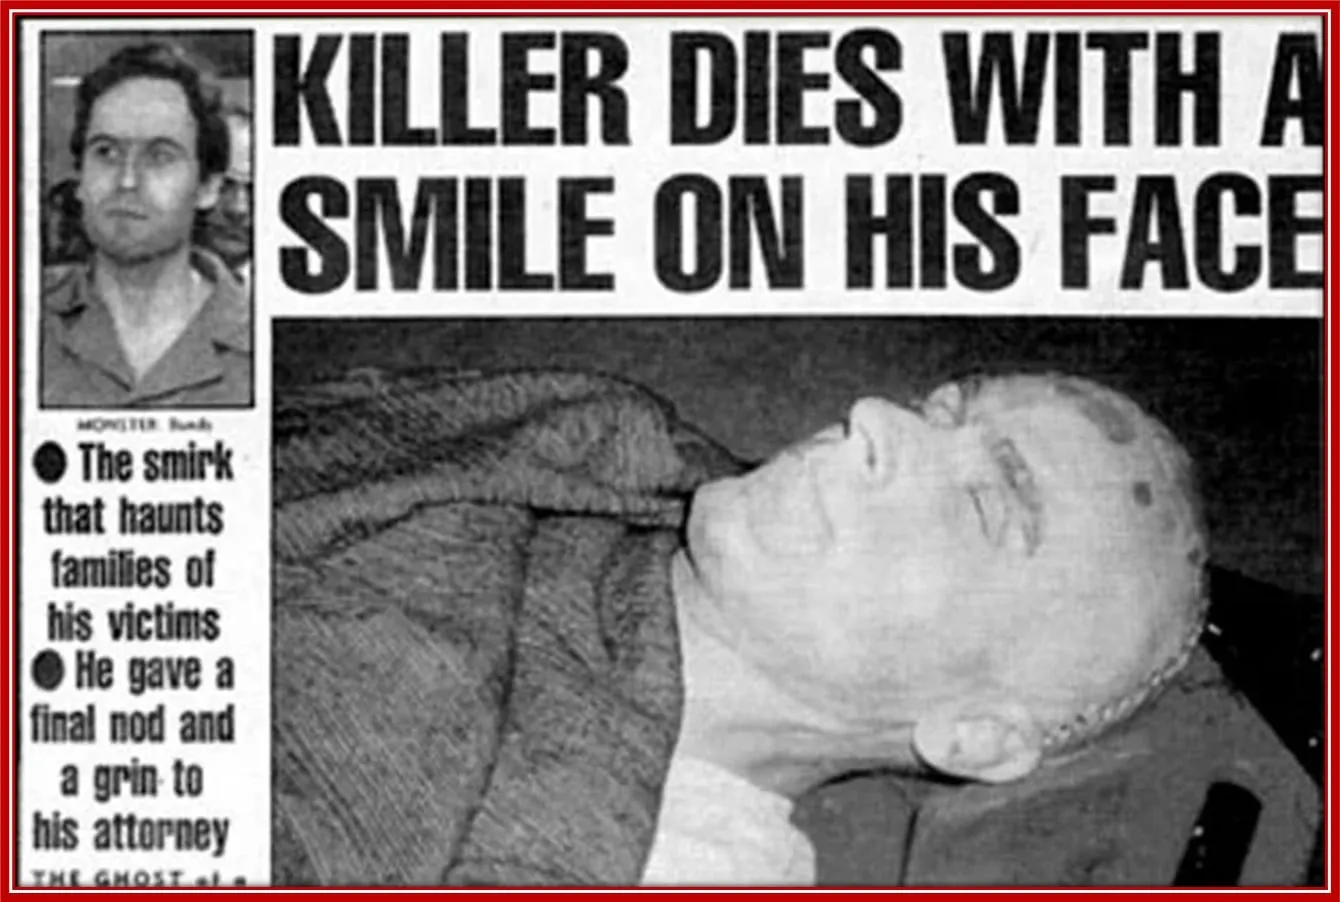 According to reports, Ted Bundy died with a smile on his face.